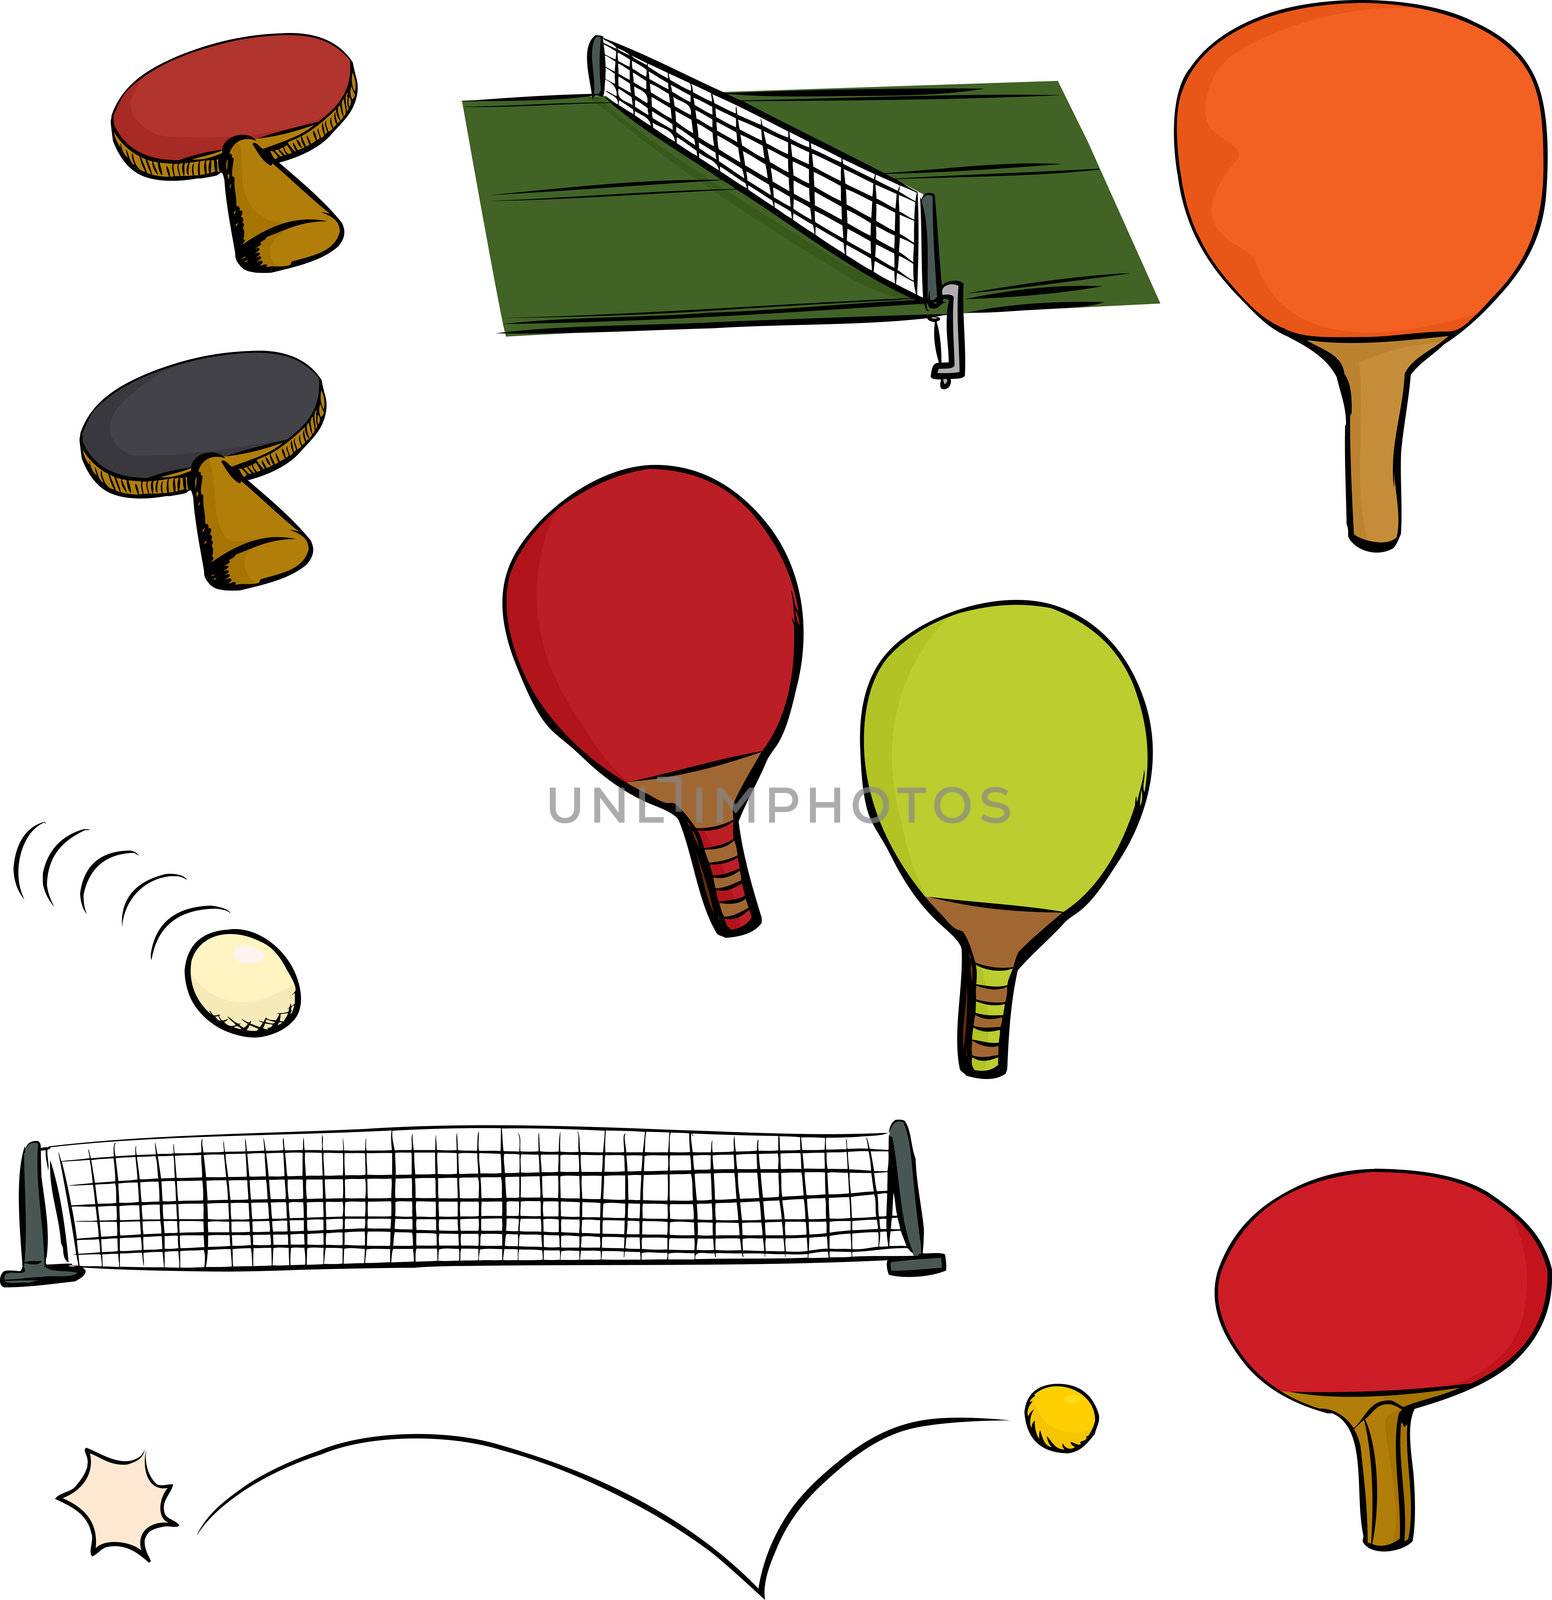 Ping Pong Game Set by TheBlackRhino